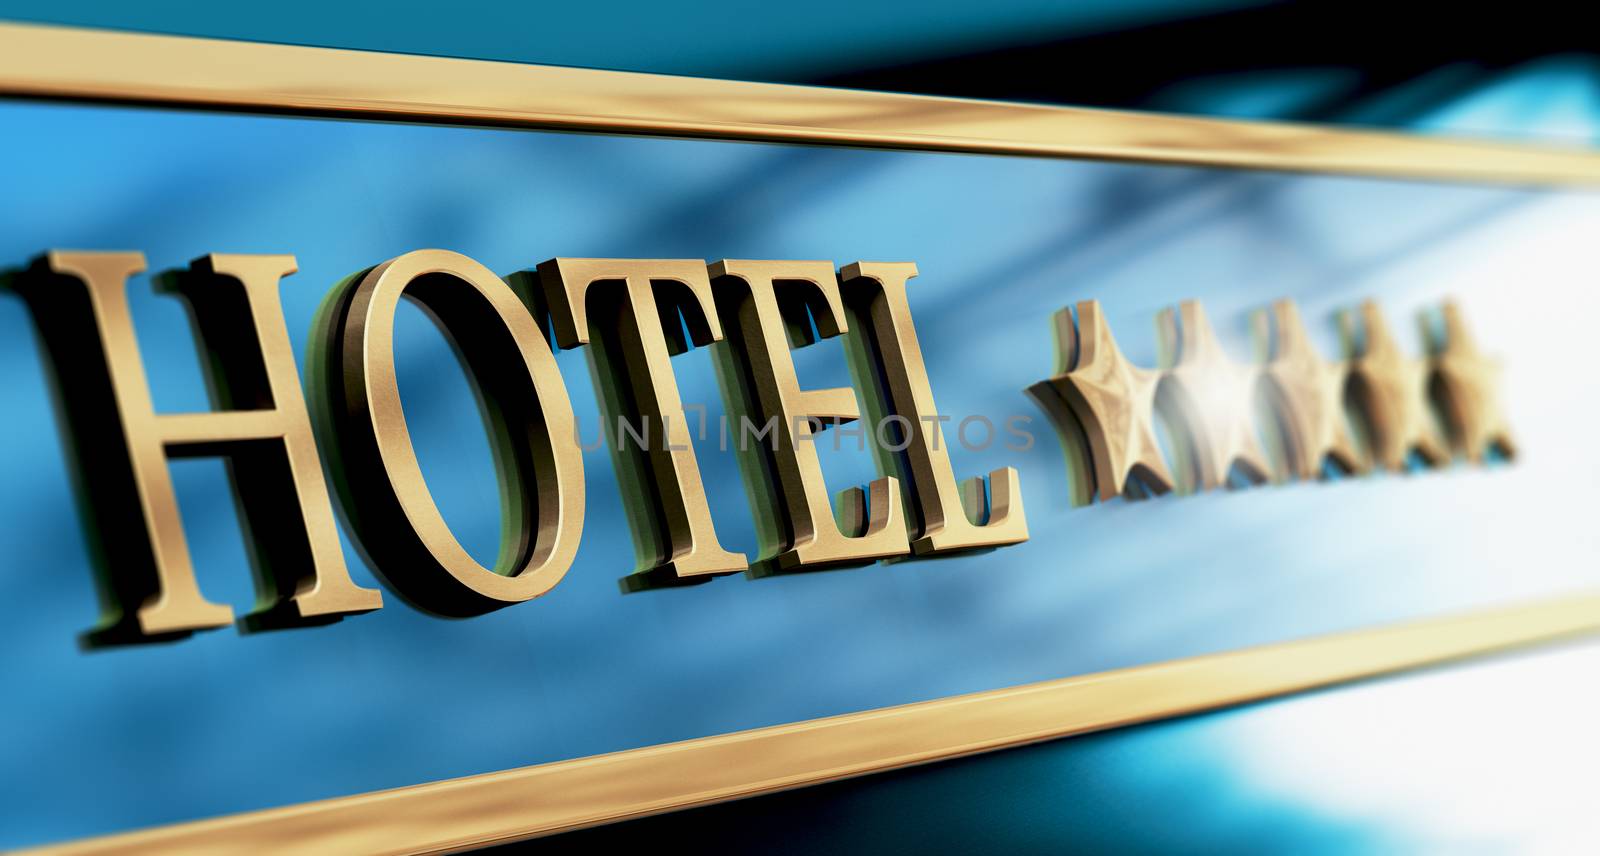 Five Stars Luxury Hotel Sign or Header by Olivier-Le-Moal